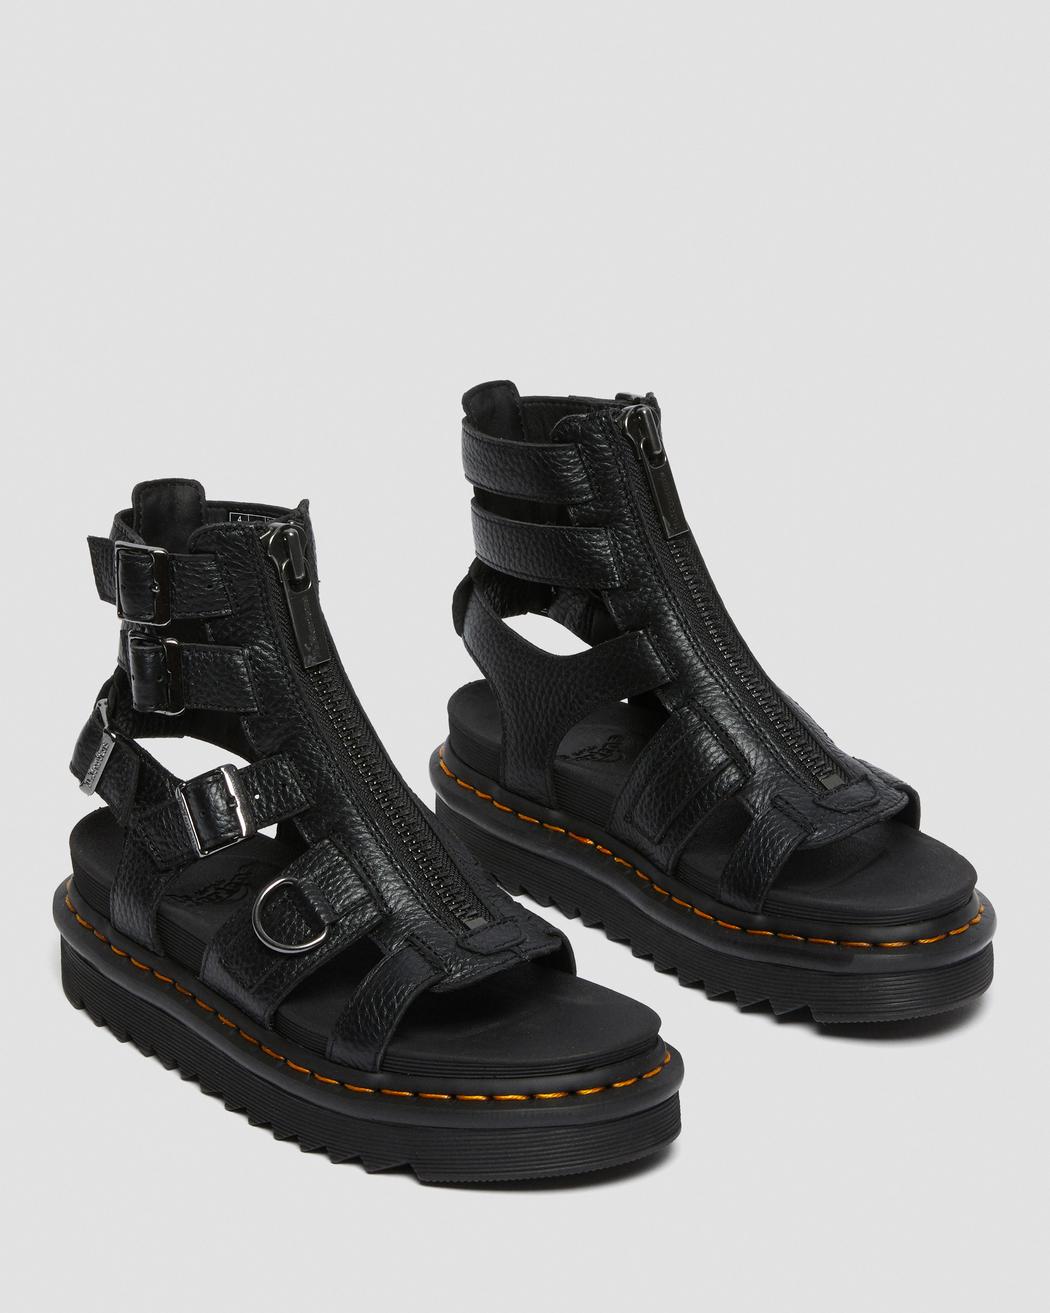 Olson Zipped Leather Strap Sandals | Dr. Martens